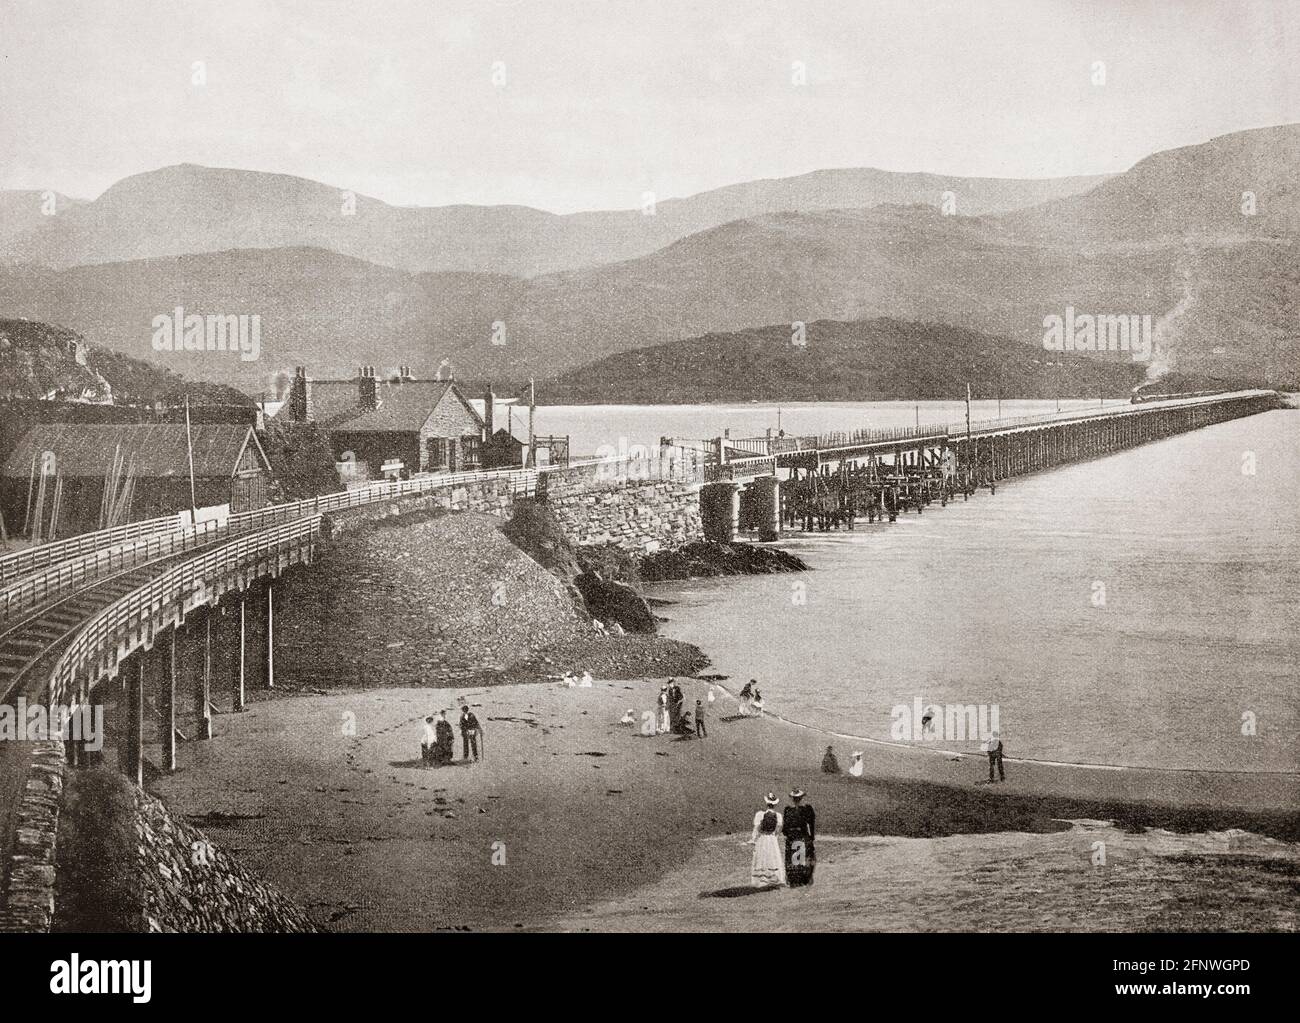 A late 19th Century view of Barmouth Bridge, or Barmouth Viaduct, a single-track wooden railway viaduct across the estuary of the Afon Mawddach near Barmouth, Wales. It is 820 metres (900 yd) long and carries the Cambrian Line. It is the longest timber viaduct in Wales and opened in  1867, one of the oldest in regular use in Britain. Cader Idris mountain can be seen on the far bank. Stock Photo